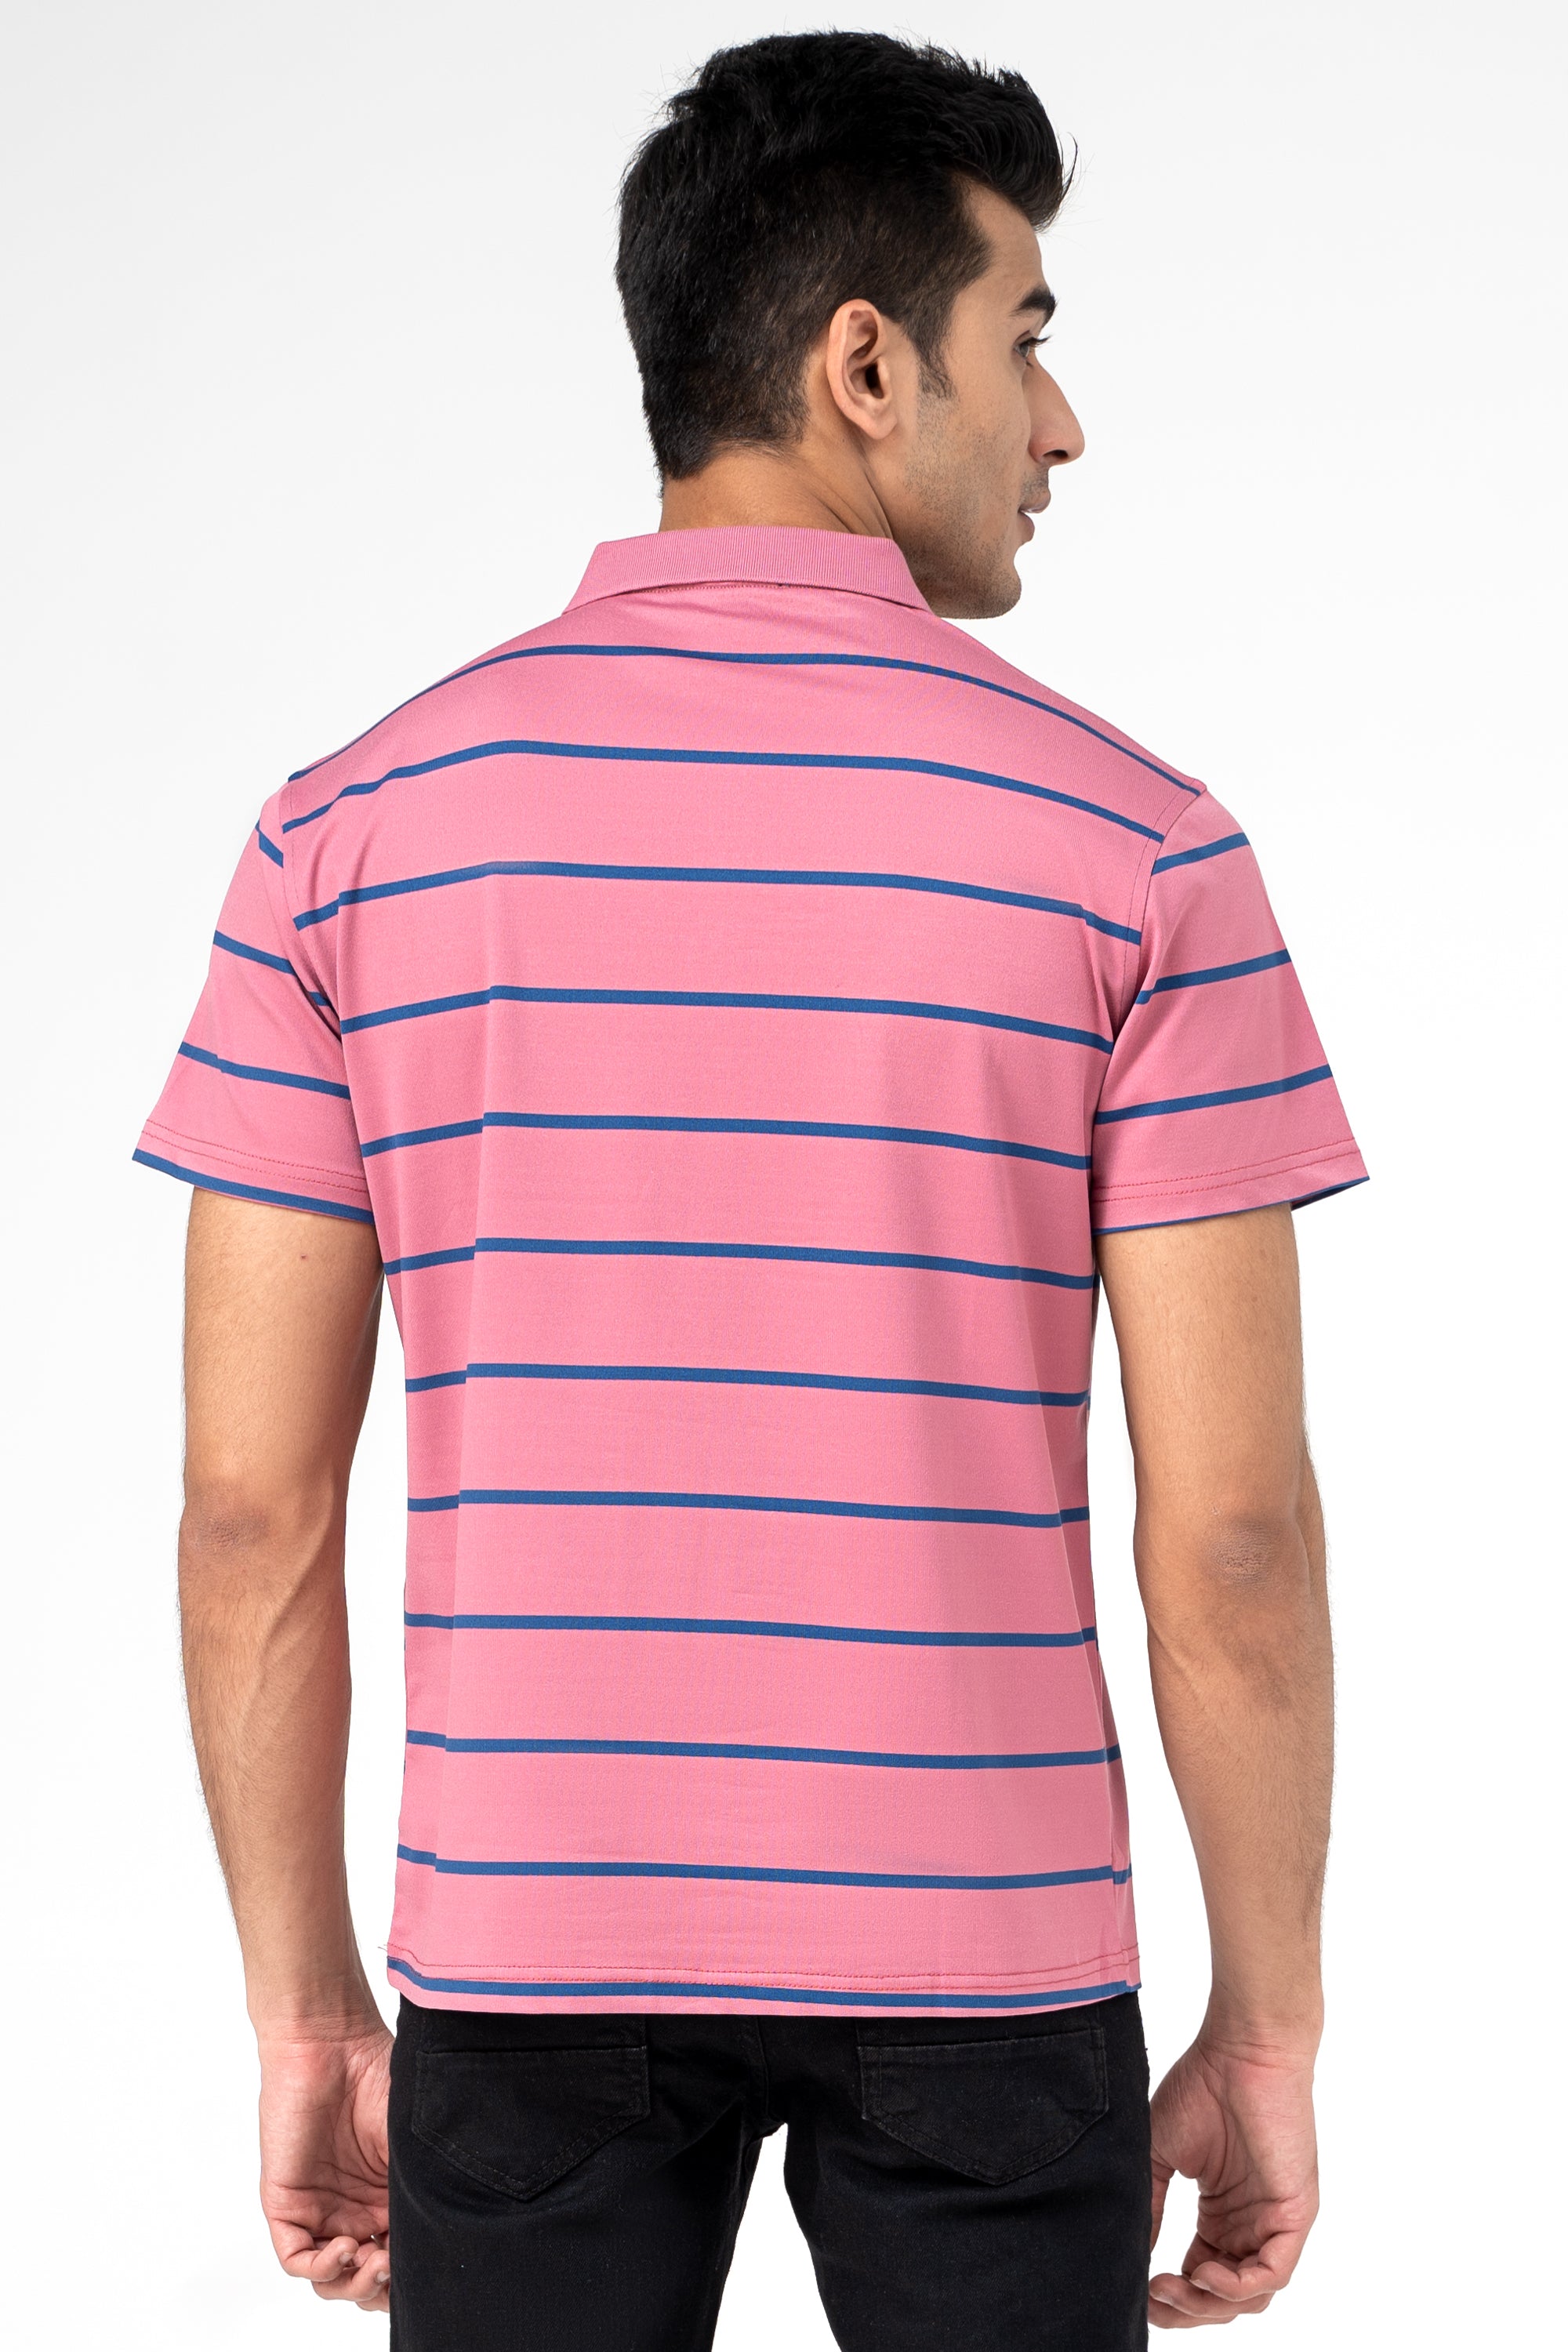 EXECUTIVE ICONIC POLO  CORAL PINK